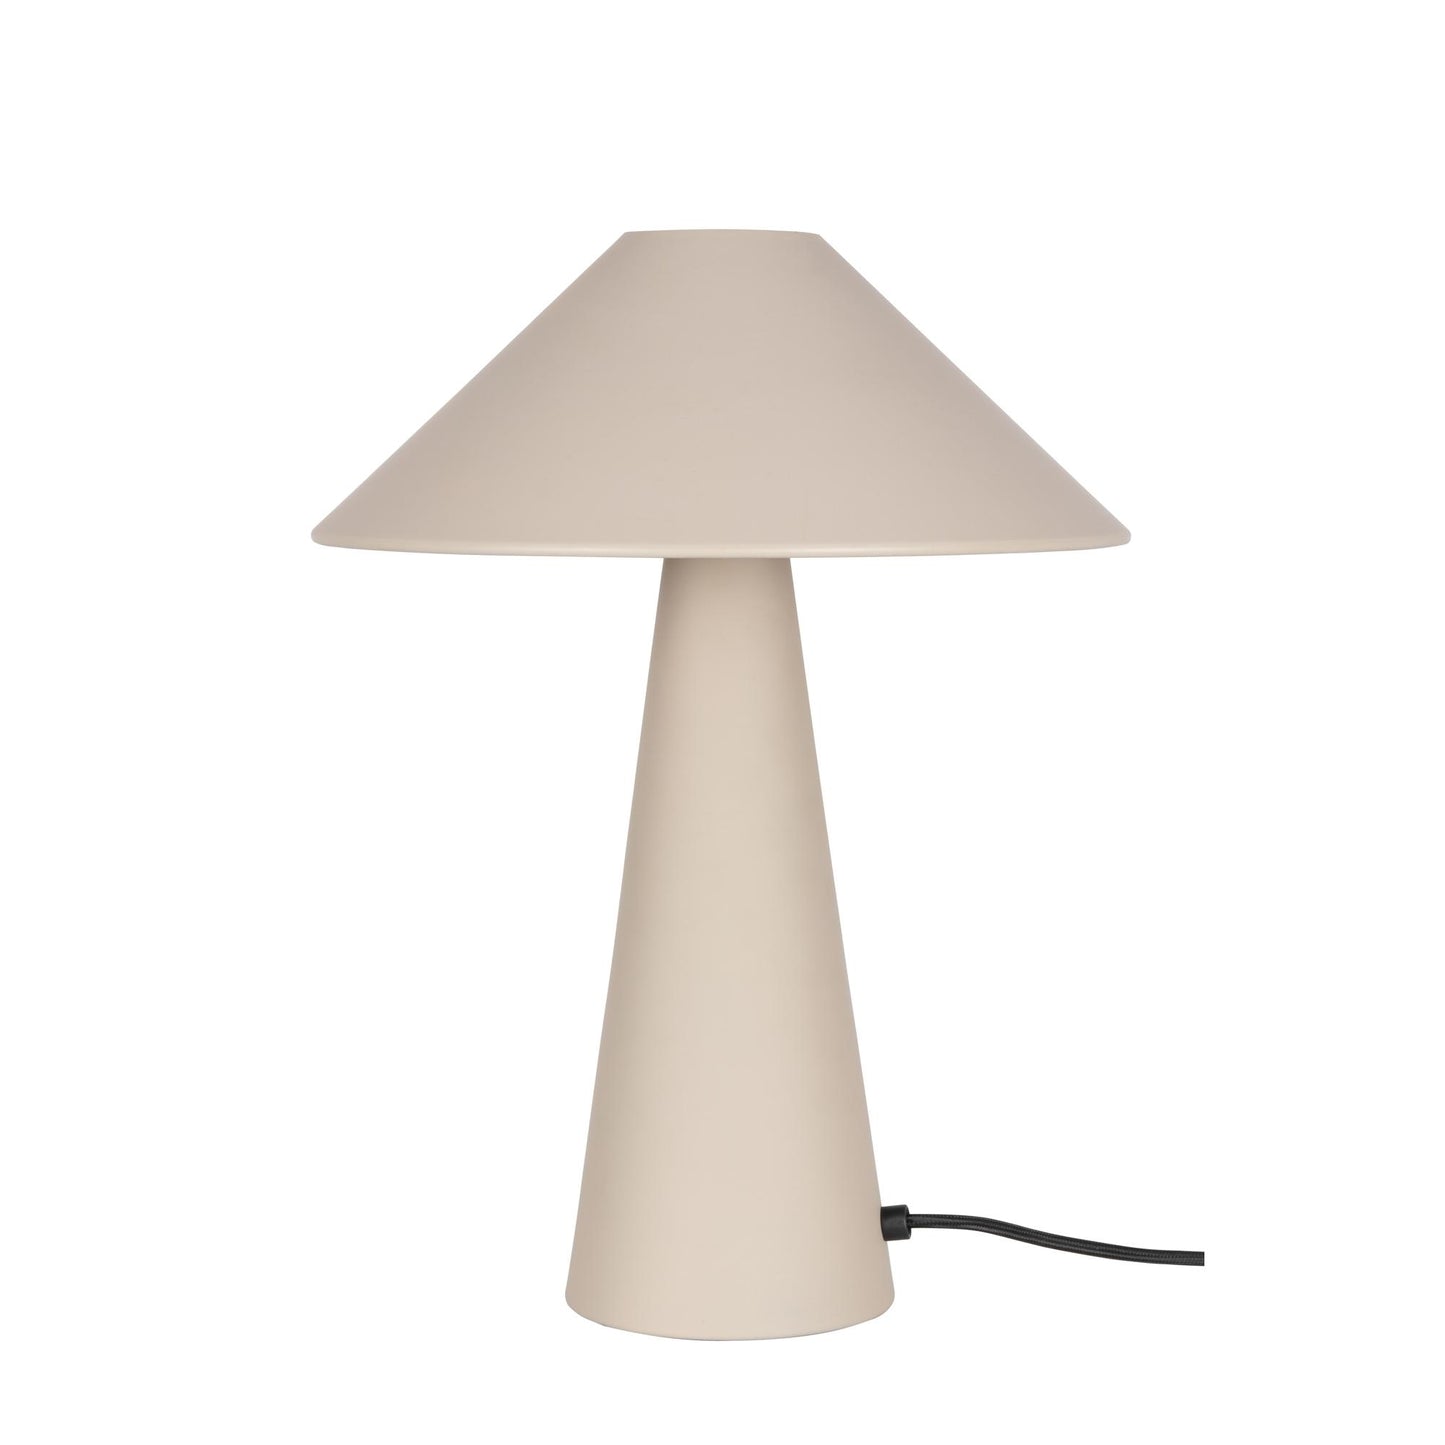 Cannes Table Lamp by Globen Lighting #Mud